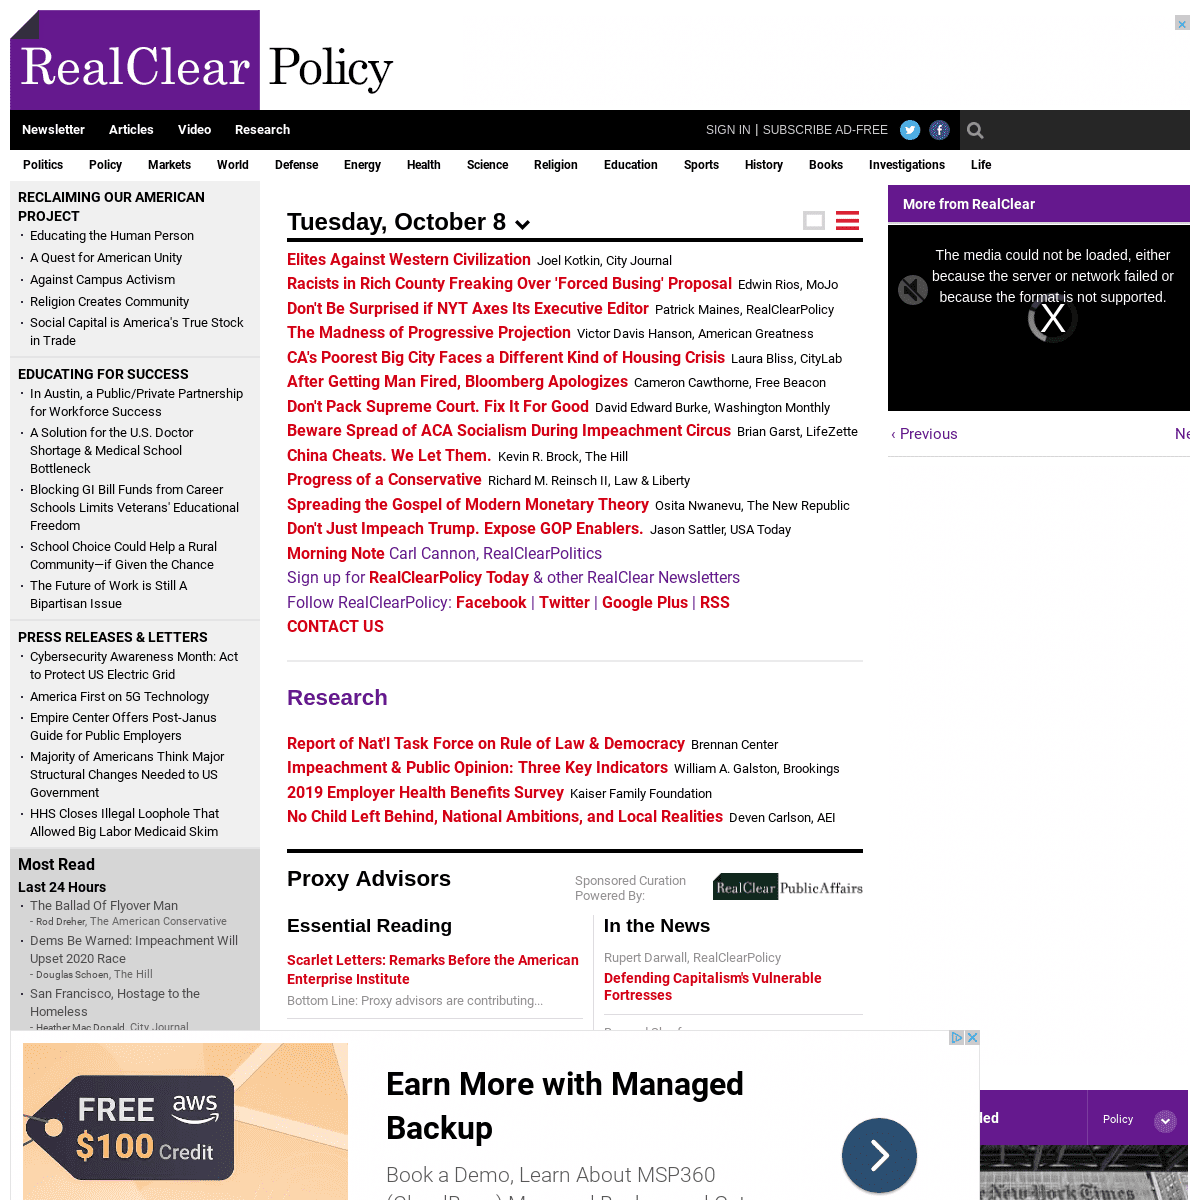 A complete backup of realclearpolicy.com